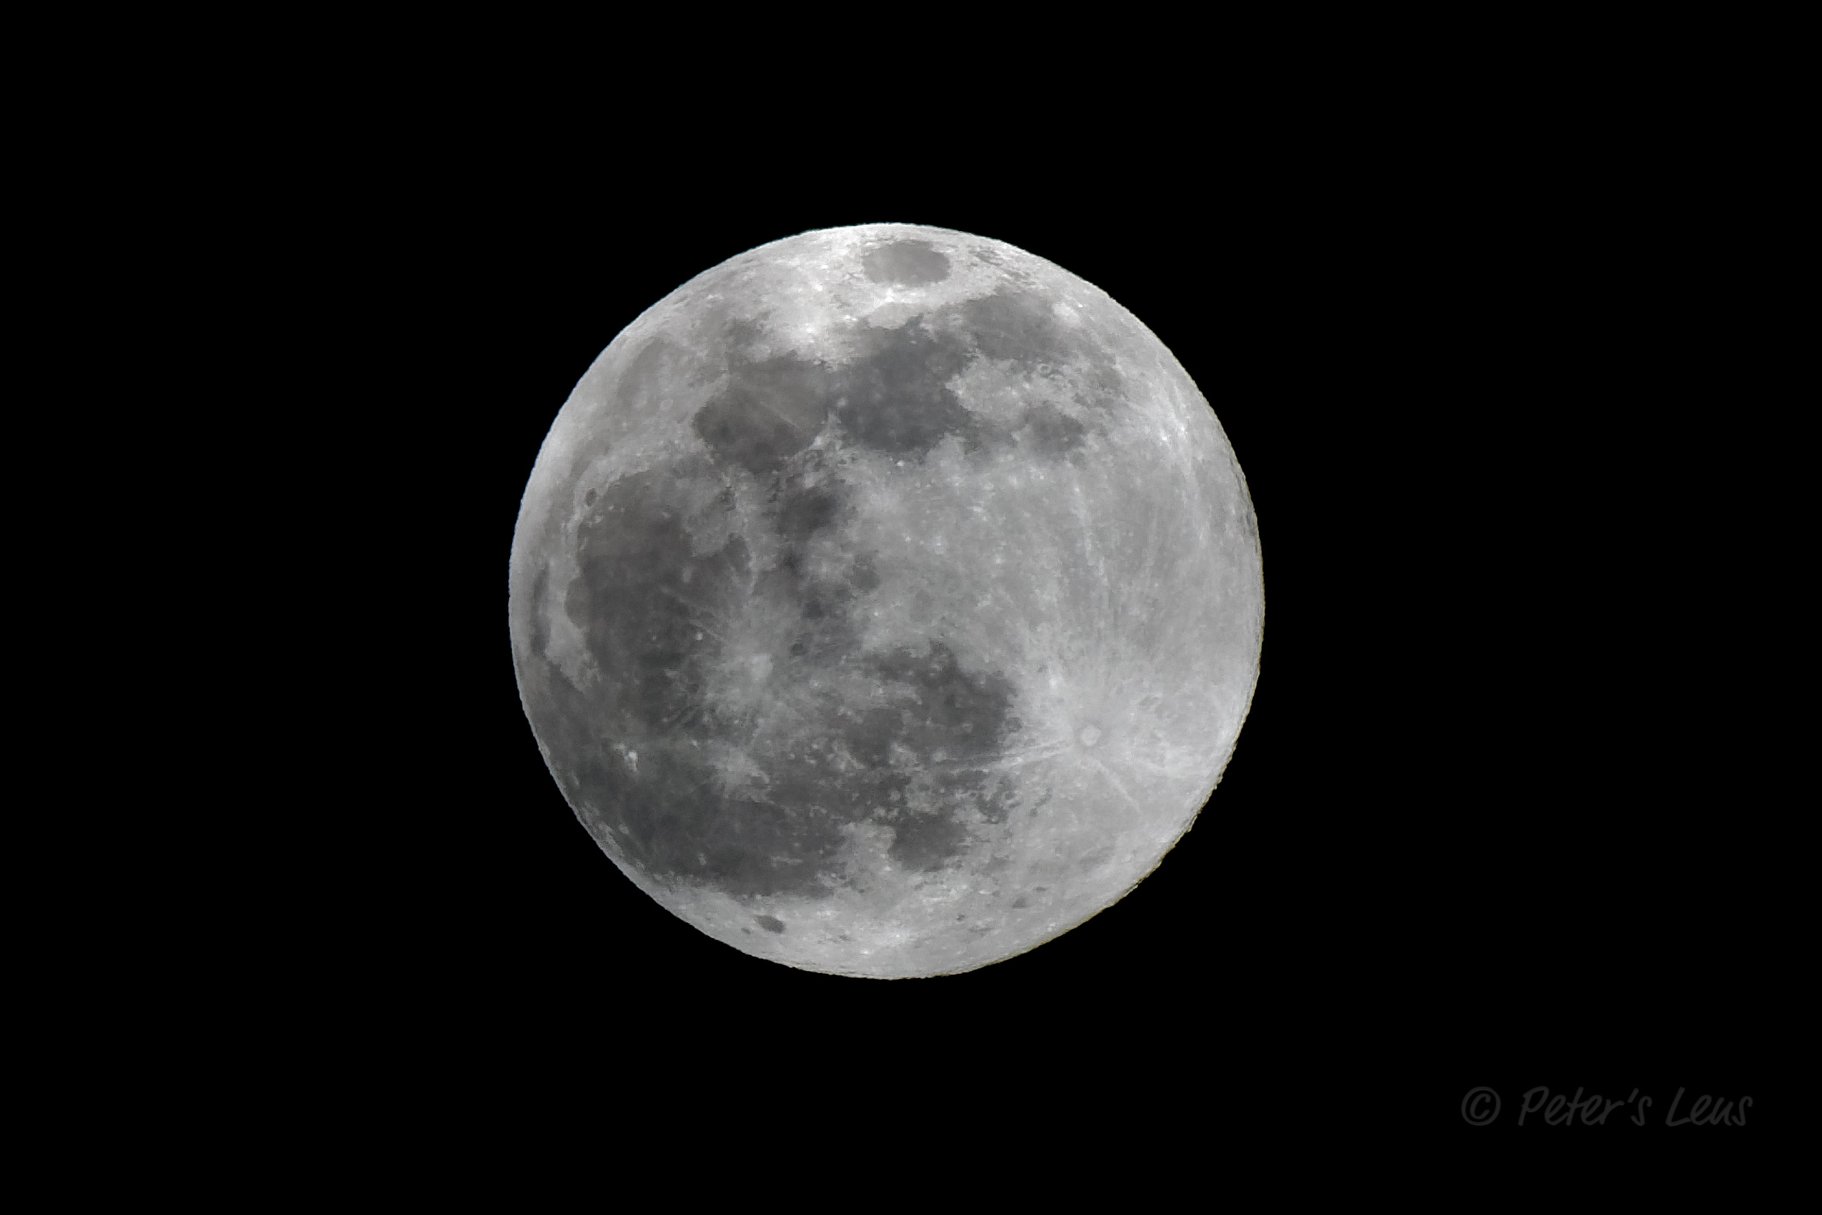 Full Moon rises tonight for this year's Harvest Moon iNFOnews